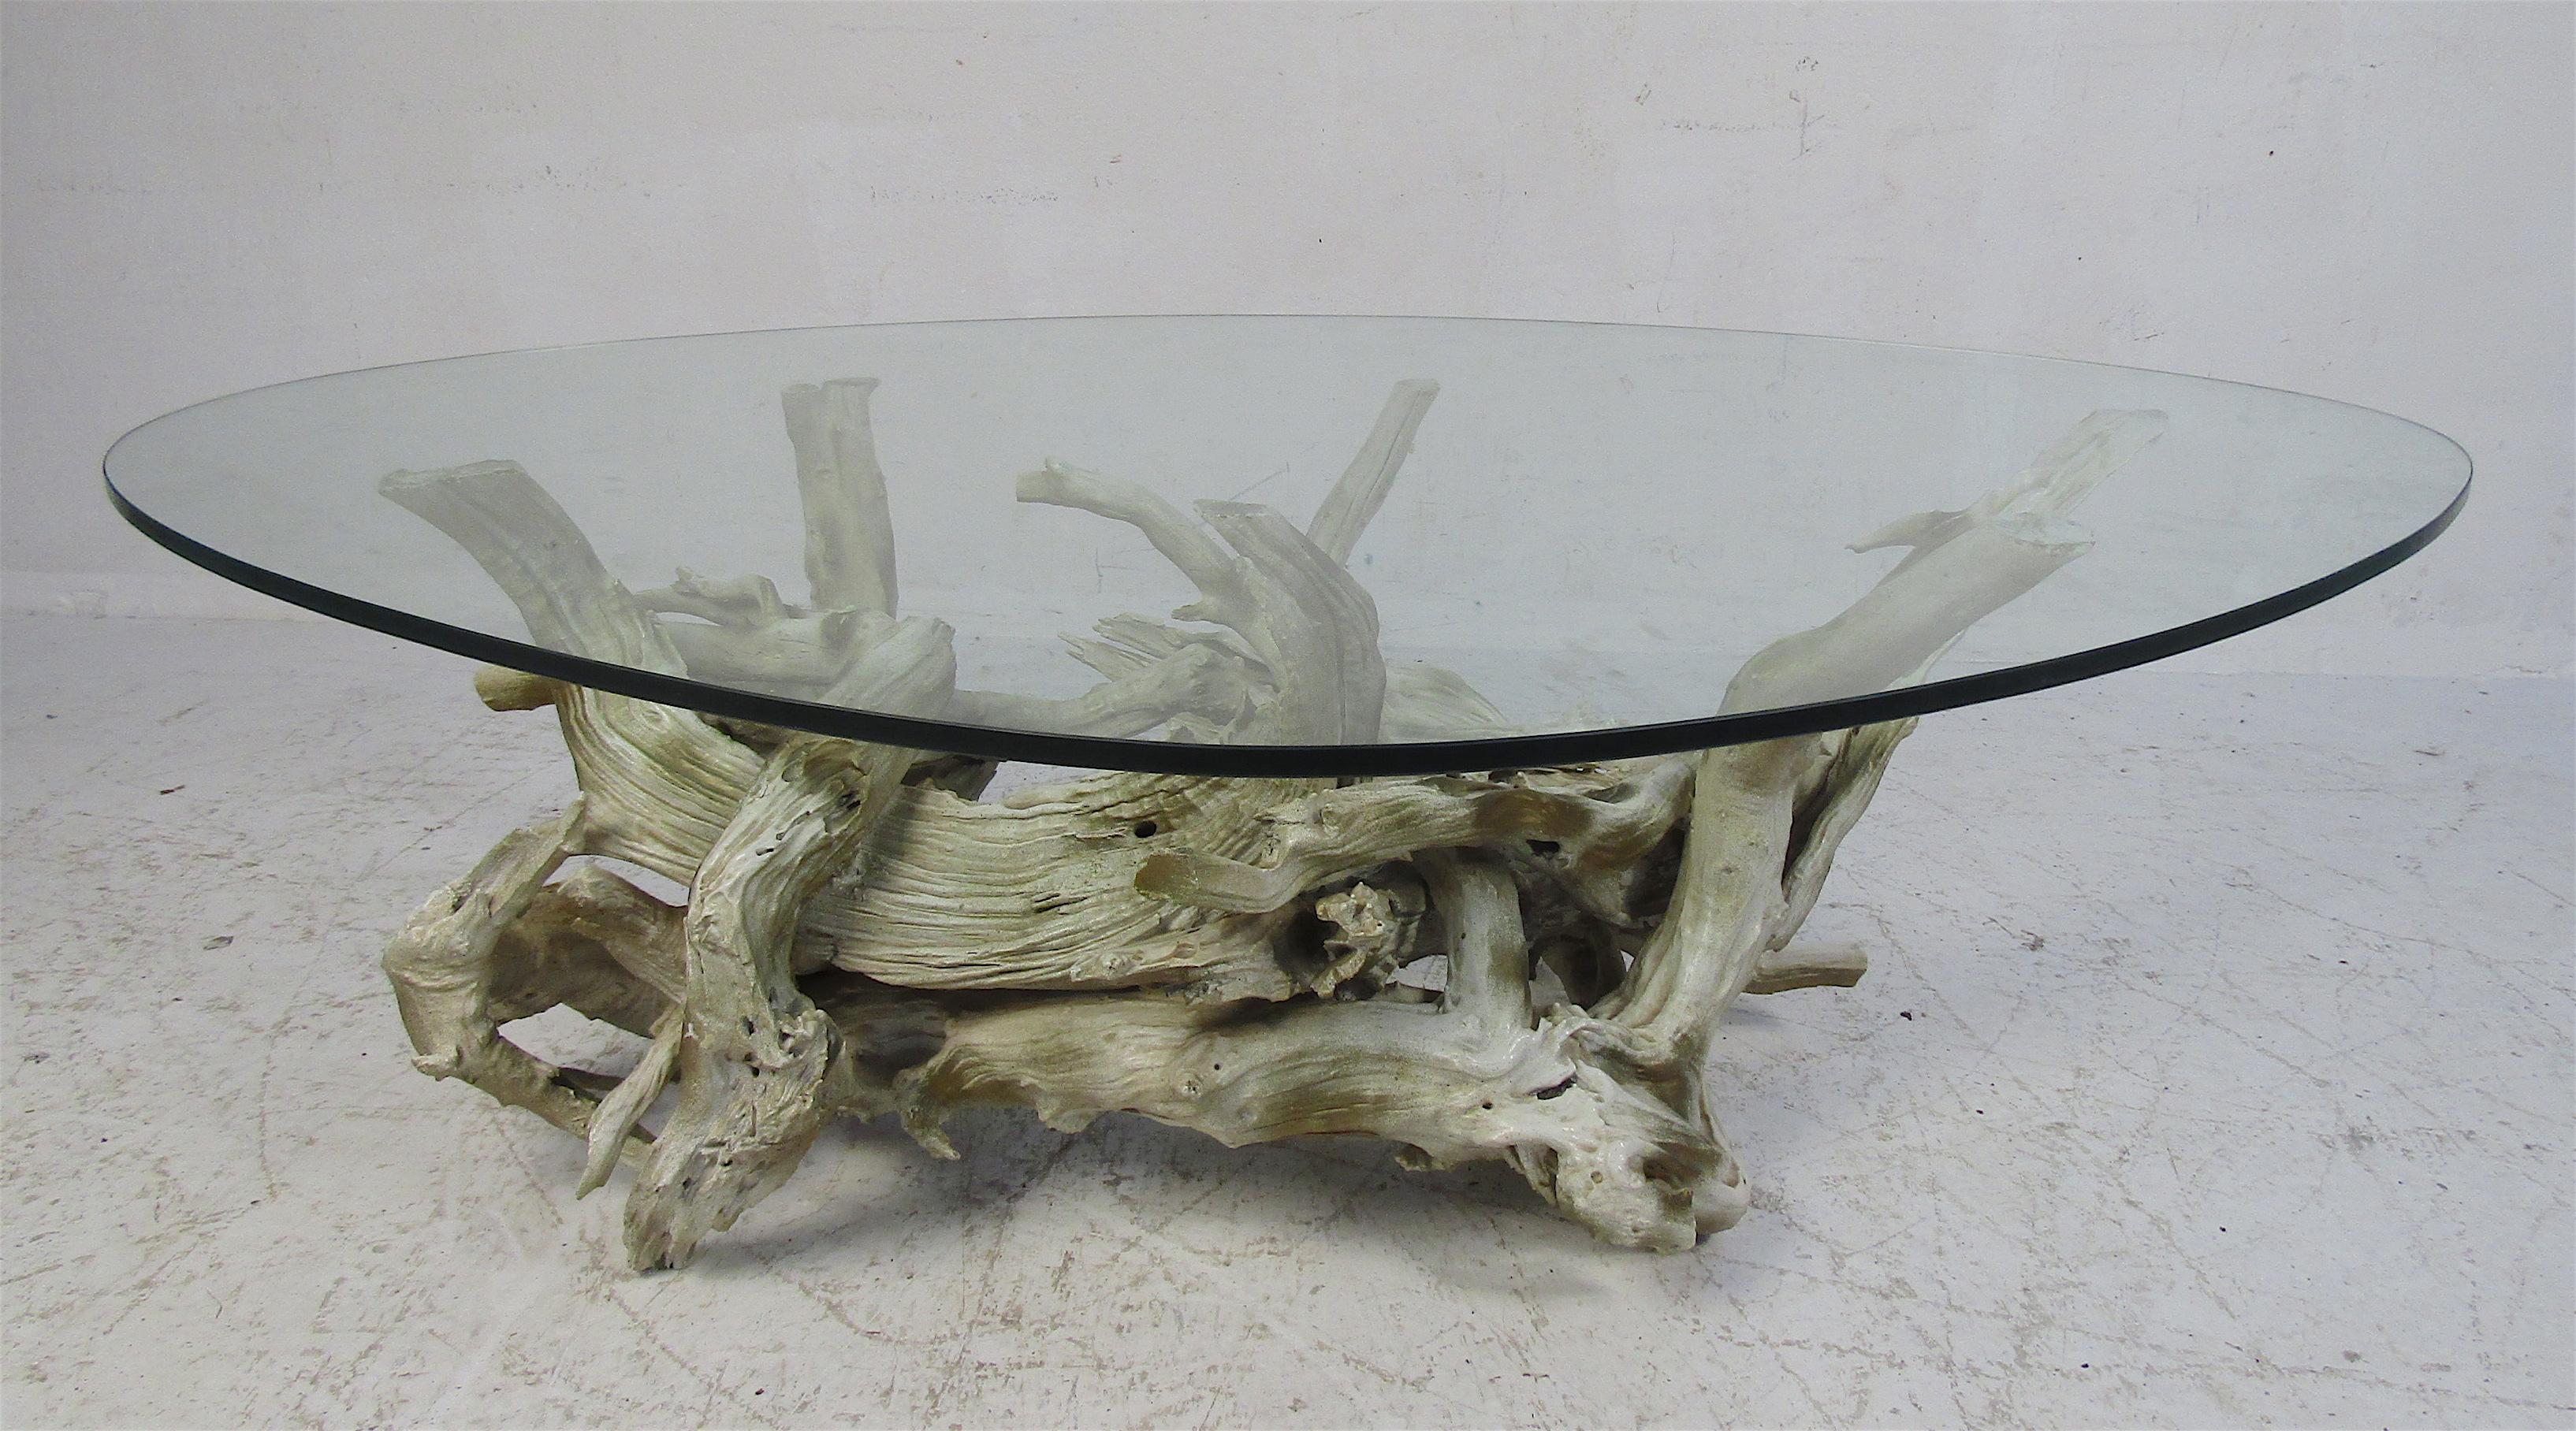 This stunning vintage modern coffee table boasts an unusual driftwood base and a thick glass top. The perfect addition to any home, business, or office. Please confirm item location (NY or NJ).